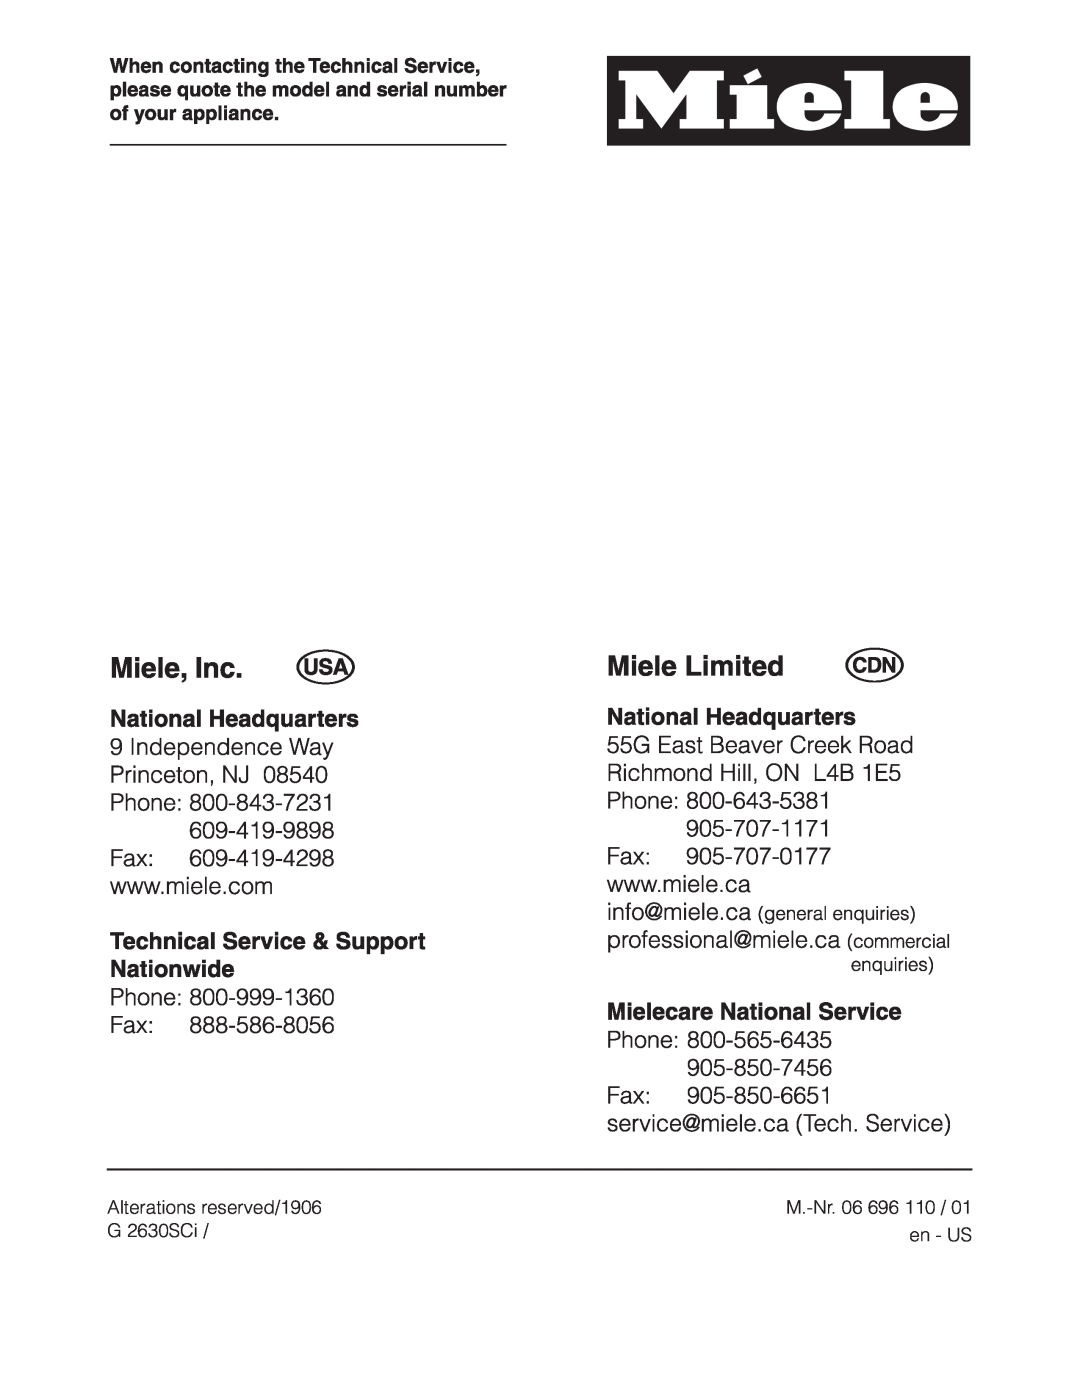 Miele G 2630 SCI manual Alterations reserved/1906, G 2630SCi, en - US, M.-Nr.06 696 110 